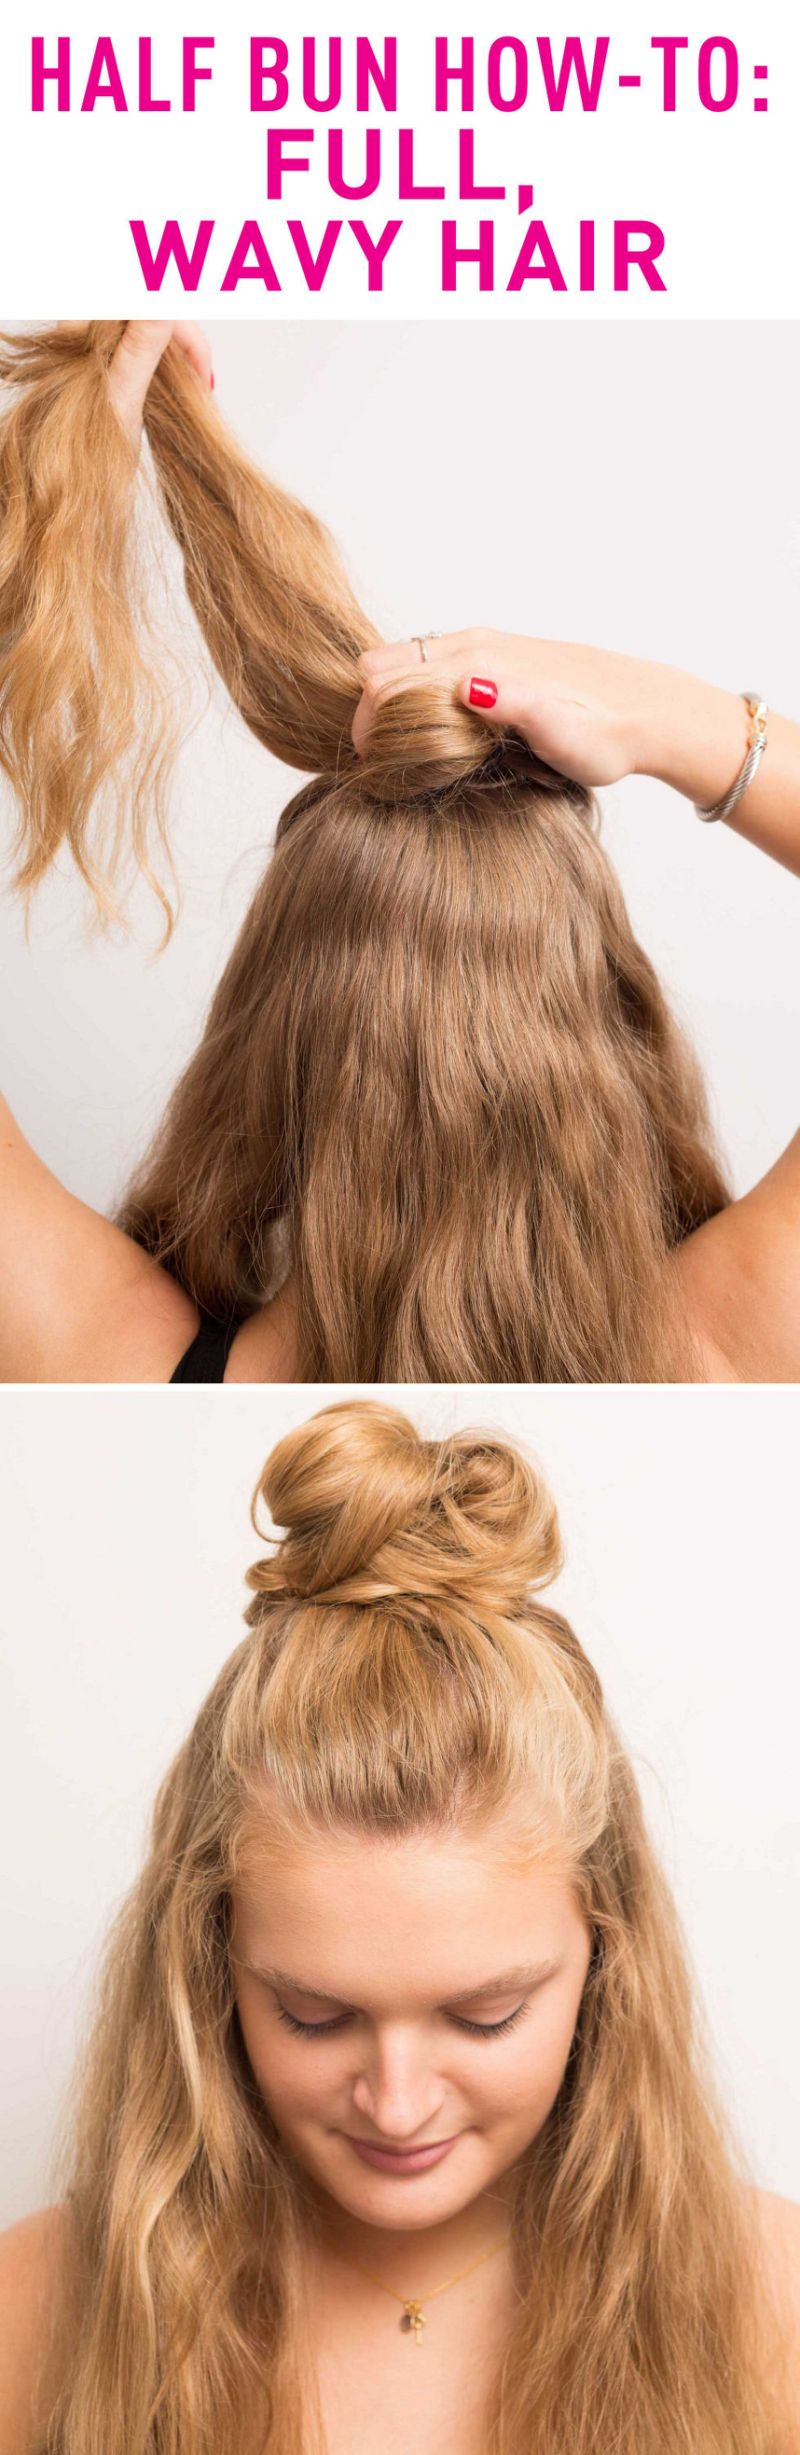 11 Super Simple Hacks To Make Your Thick Hair More Manageable